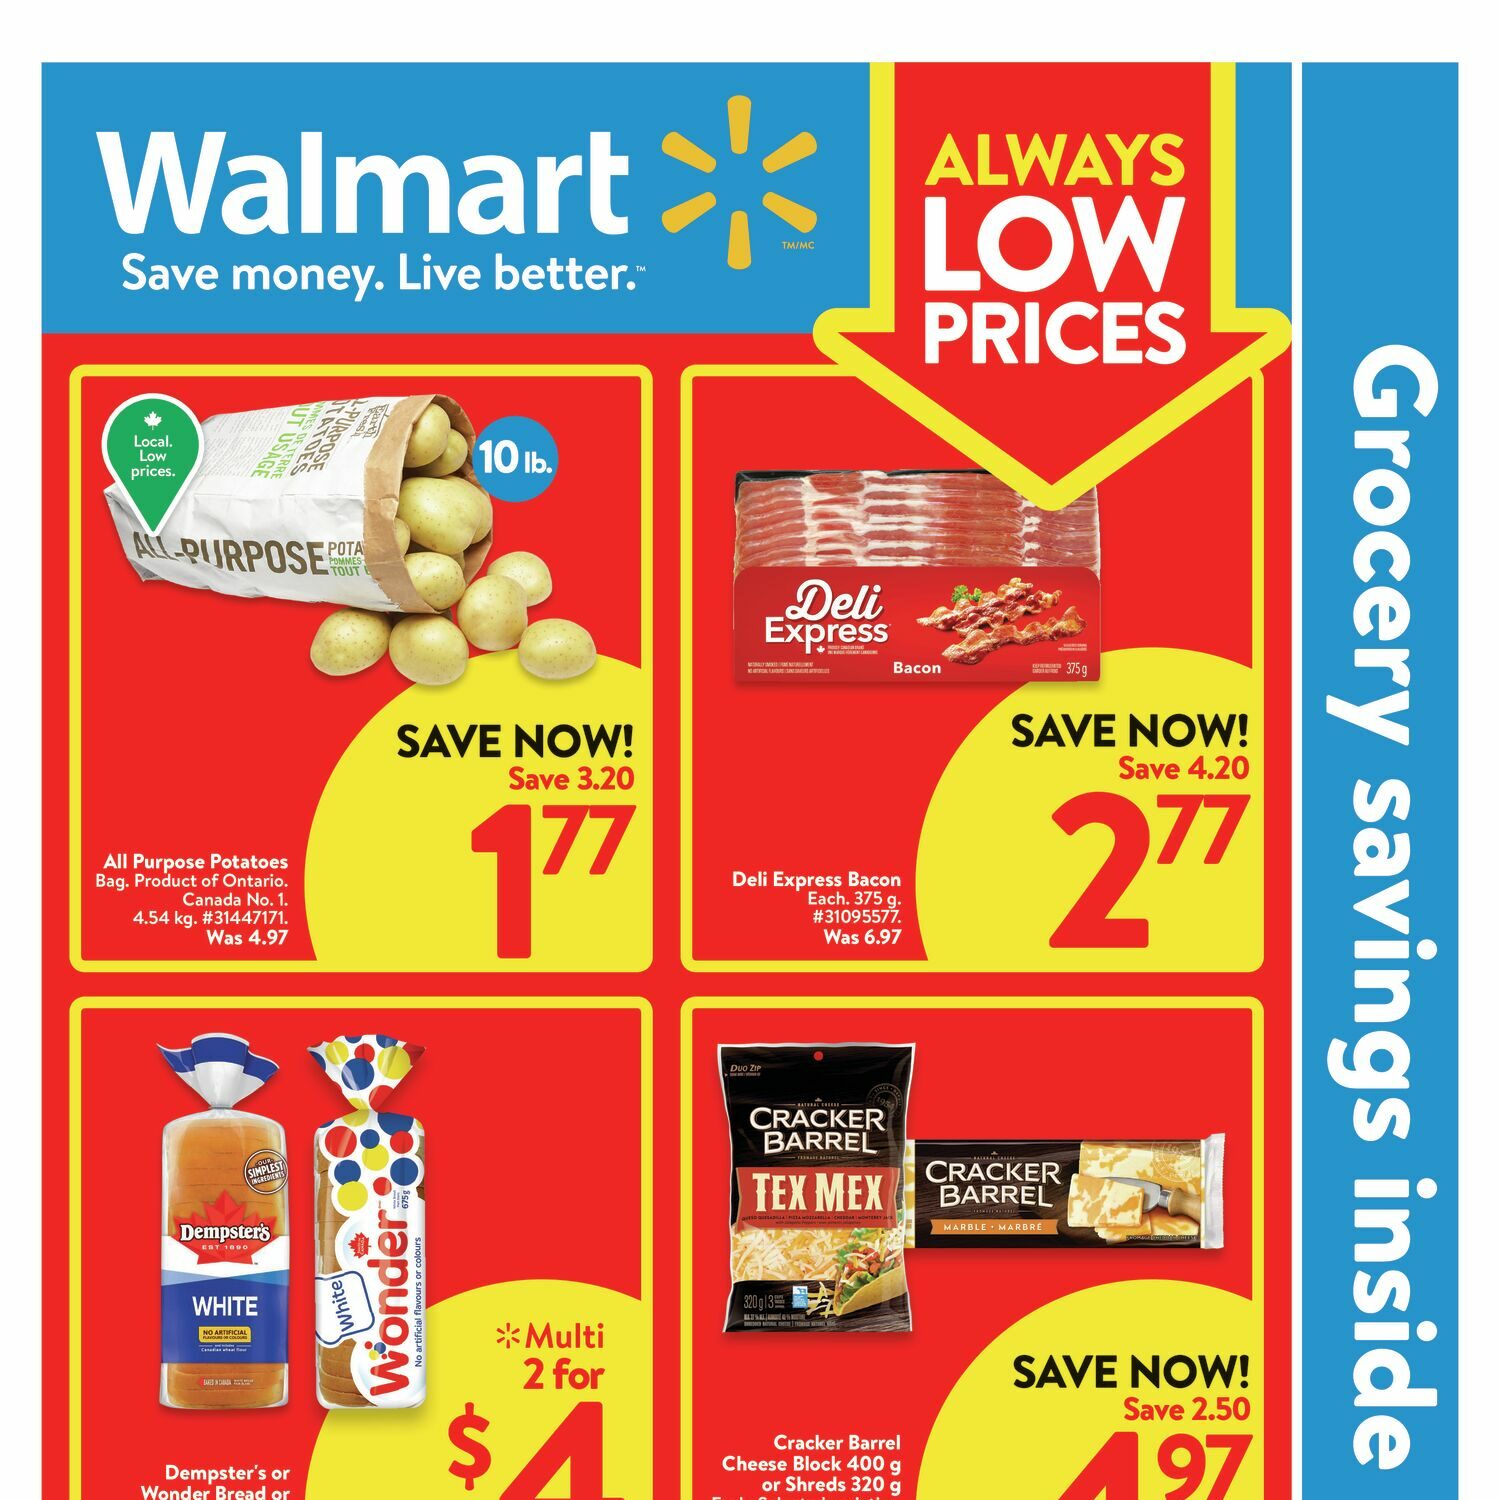 Walmart Canada Sales and Deals: One Cent Items!! - Canadian Freebies,  Coupons, Deals, Bargains, Flyers, Contests Canada Canadian Freebies,  Coupons, Deals, Bargains, Flyers, Contests Canada